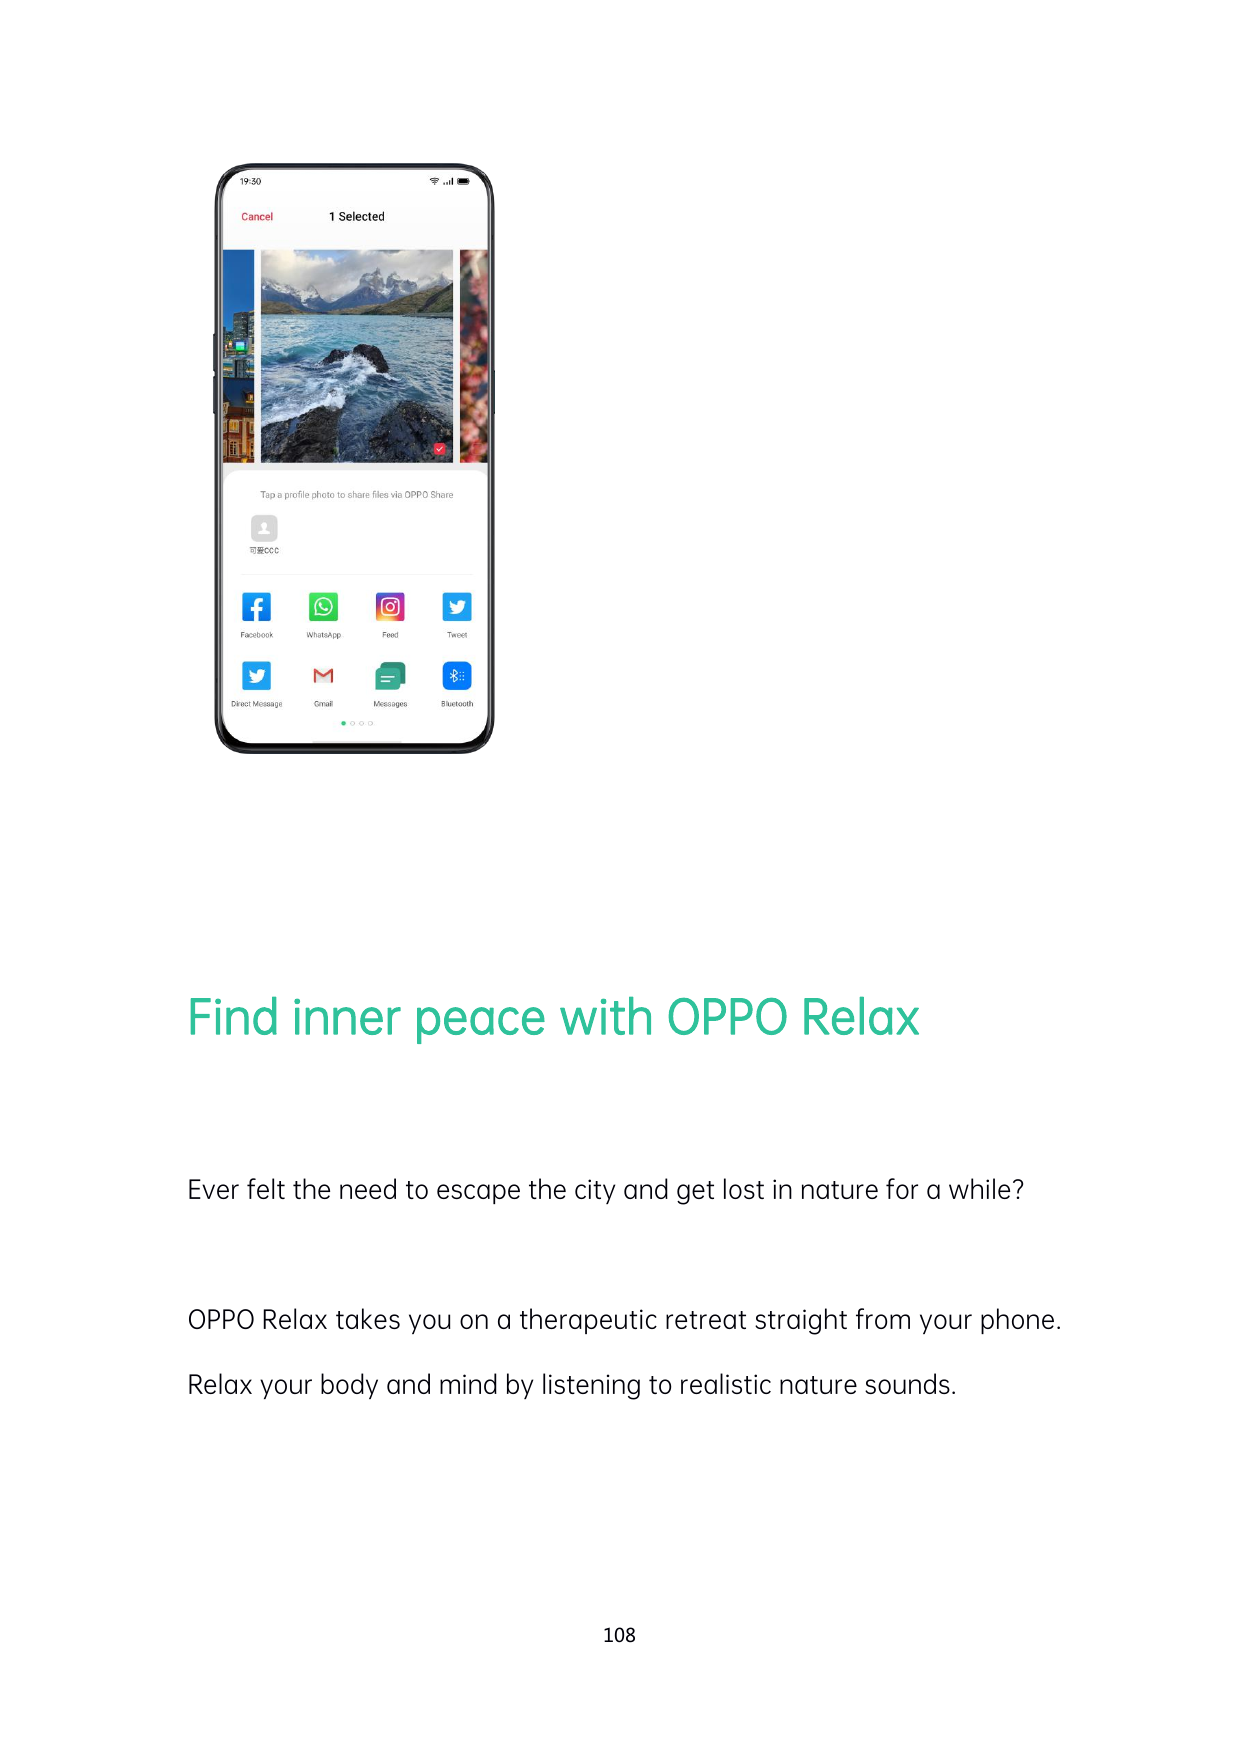 Find inner peace with OPPO RelaxEver felt the need to escape the city and get lost in nature for a while?OPPO Relax takes you on